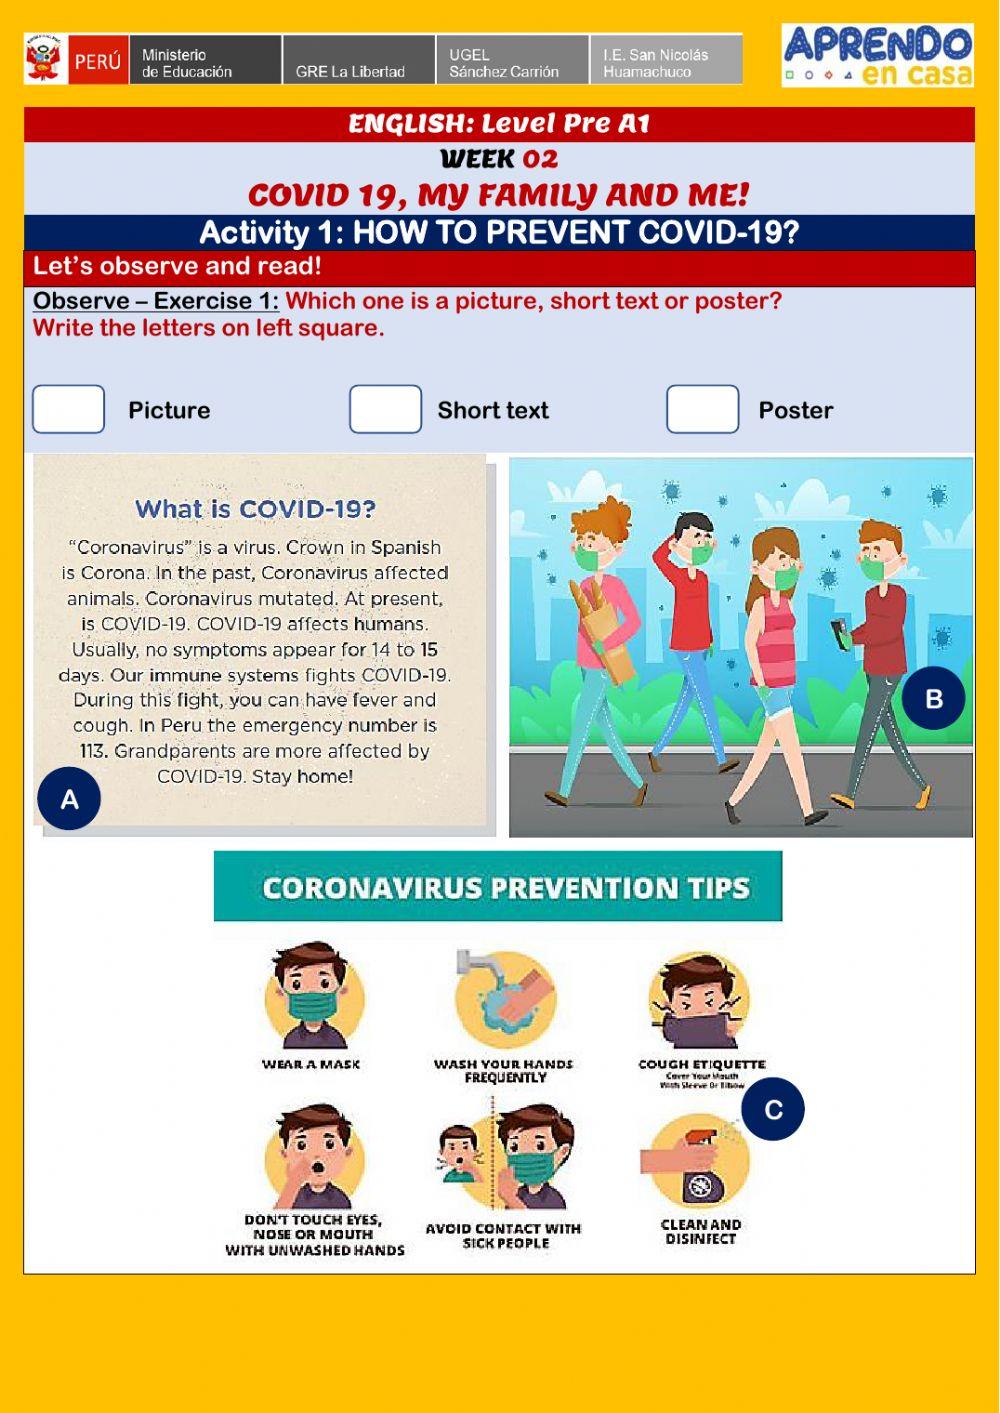 How to prevent covid-19